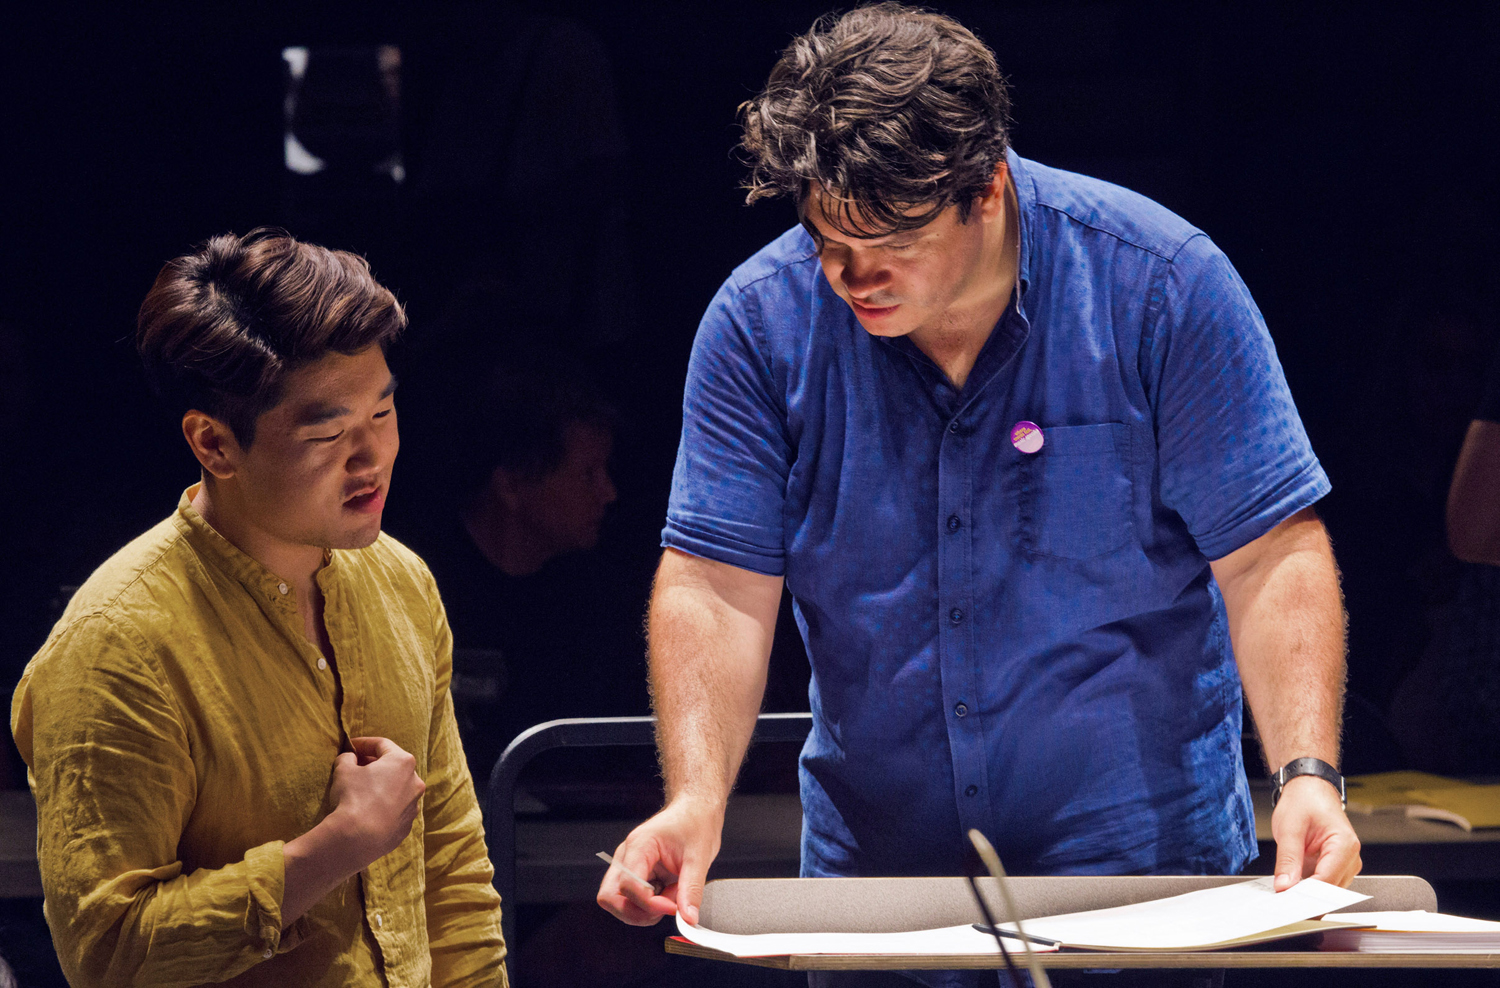 Composer Peter S. Shin works with Cristi on his new work, Hypercolor.